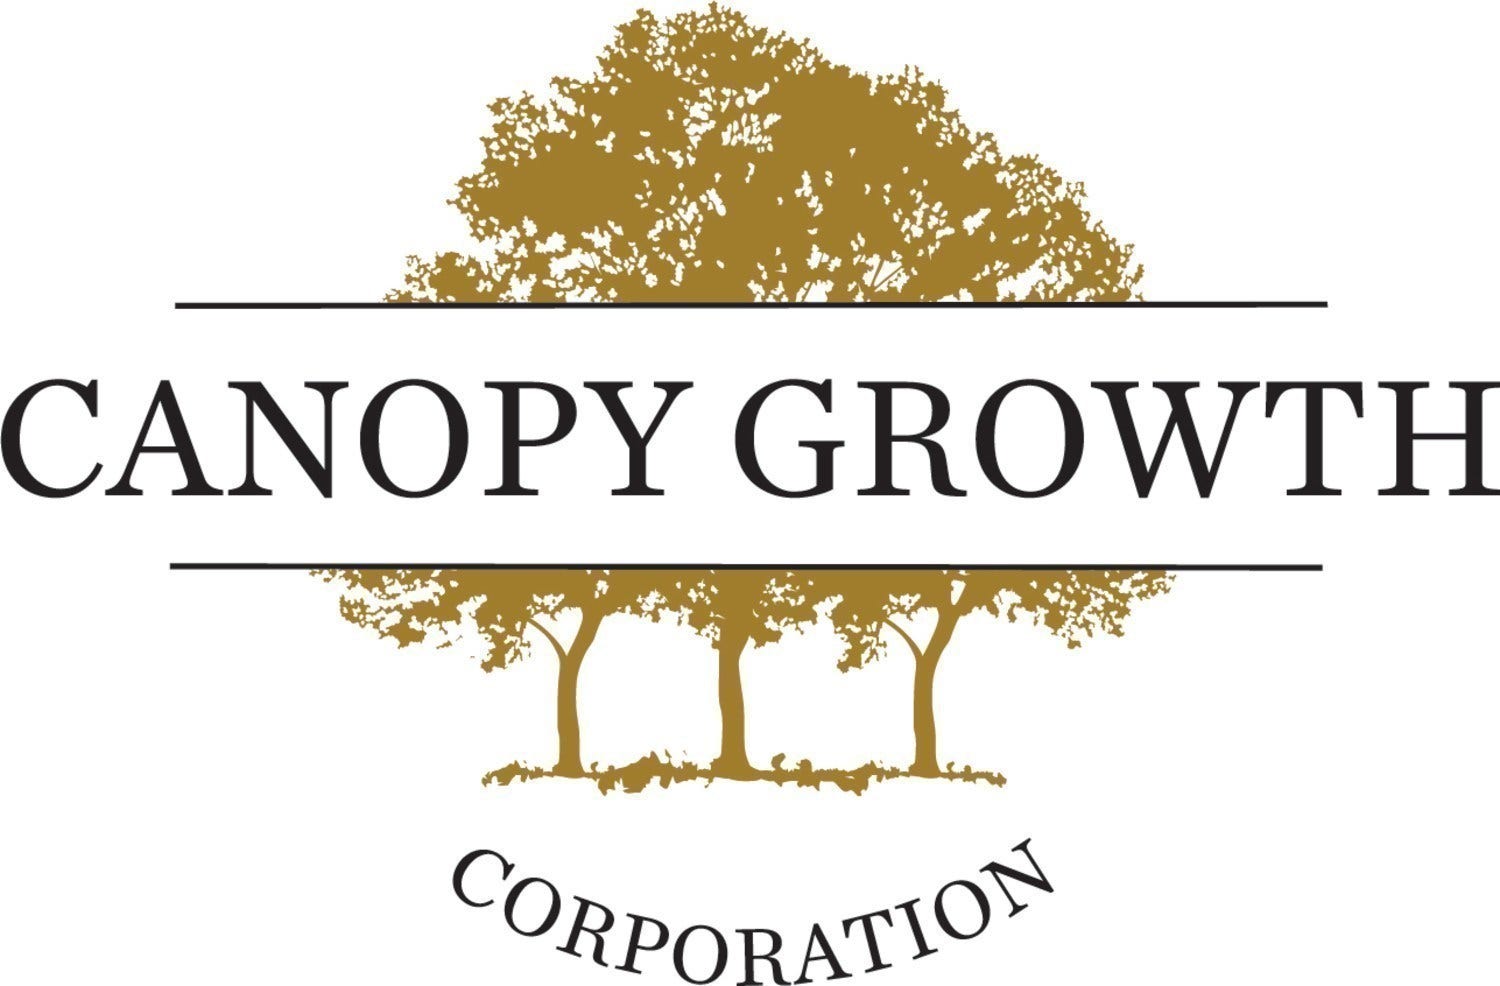 Canopy Growth Analysts Back Closures, Layoffs: 'A Bold Move'